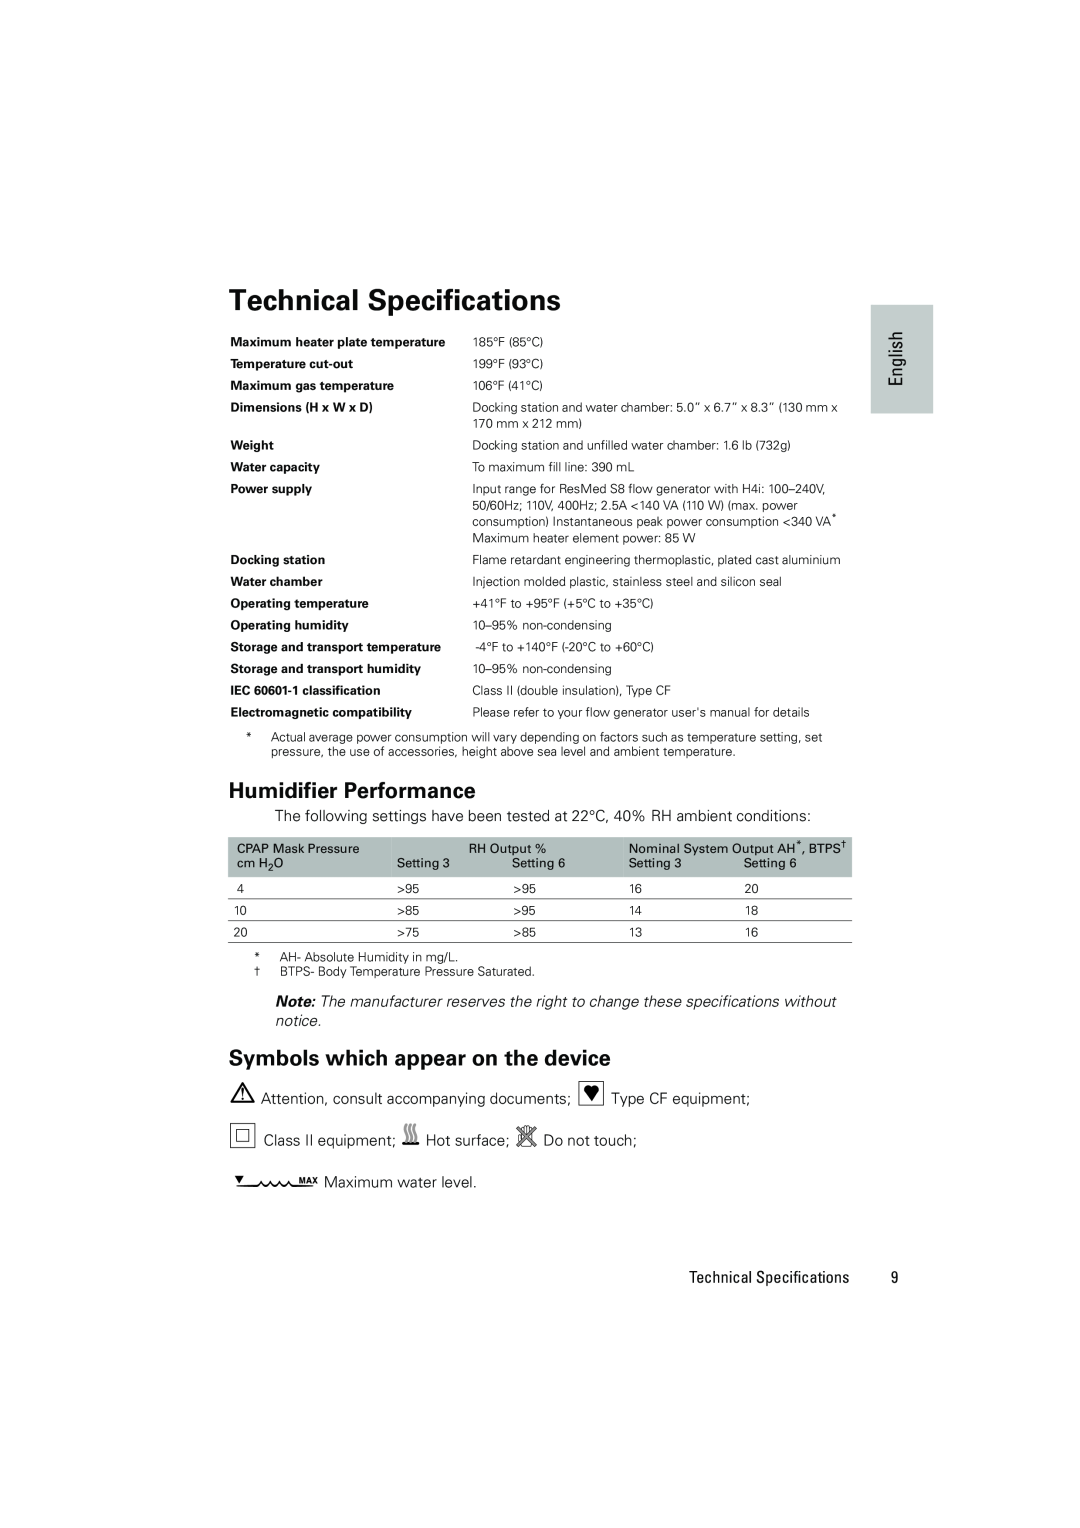 ResMed H4i manual Technical Specifications, Humidifier Performance, Symbols which appear on the device, English 